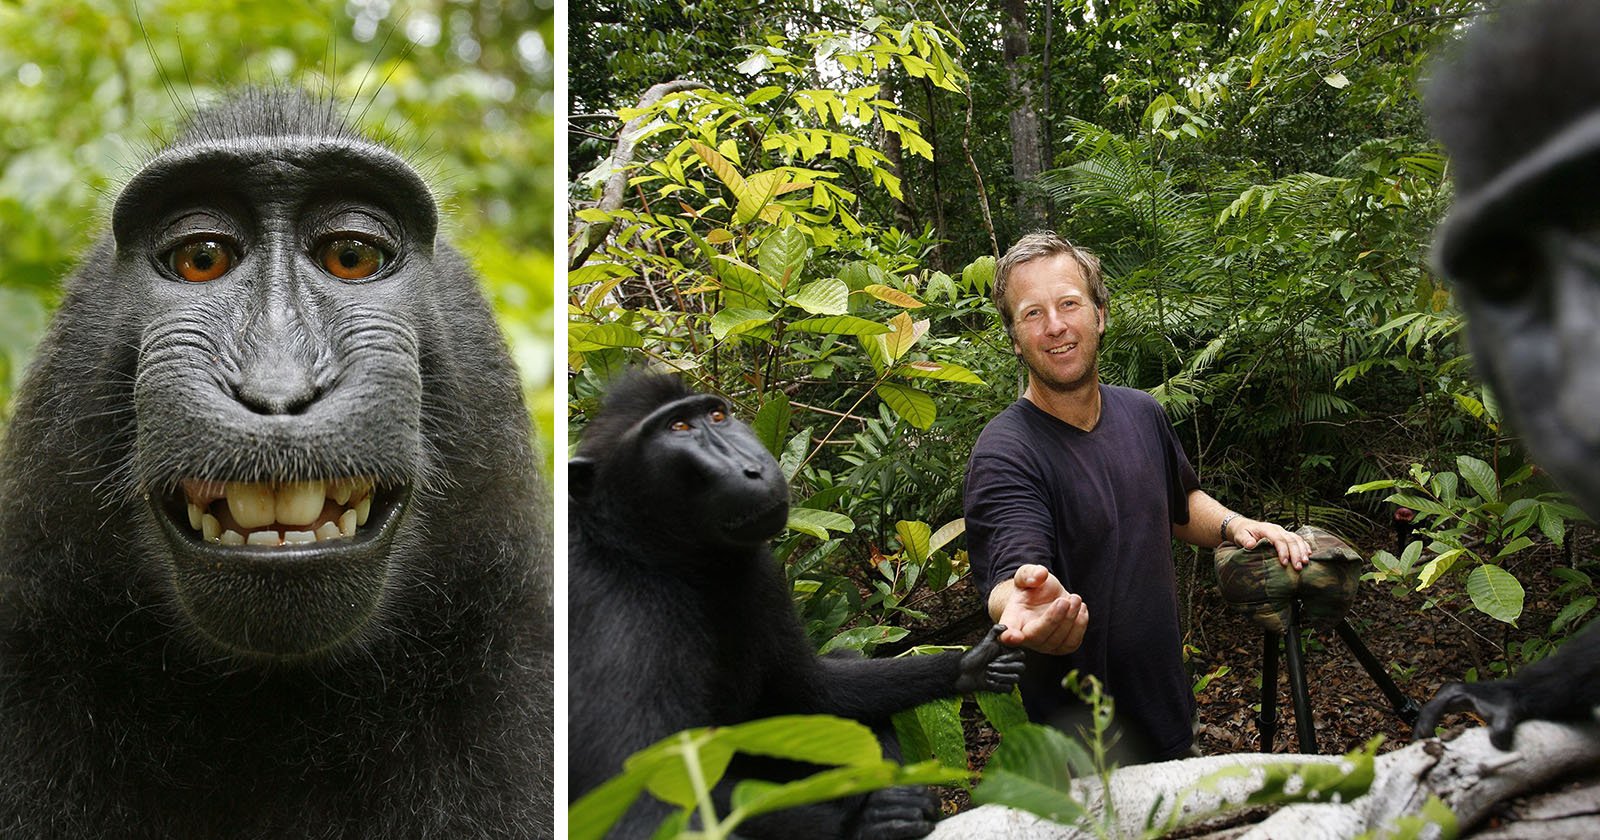 Court Refuses to Toss Lawsuit Between Monkey and Photographer